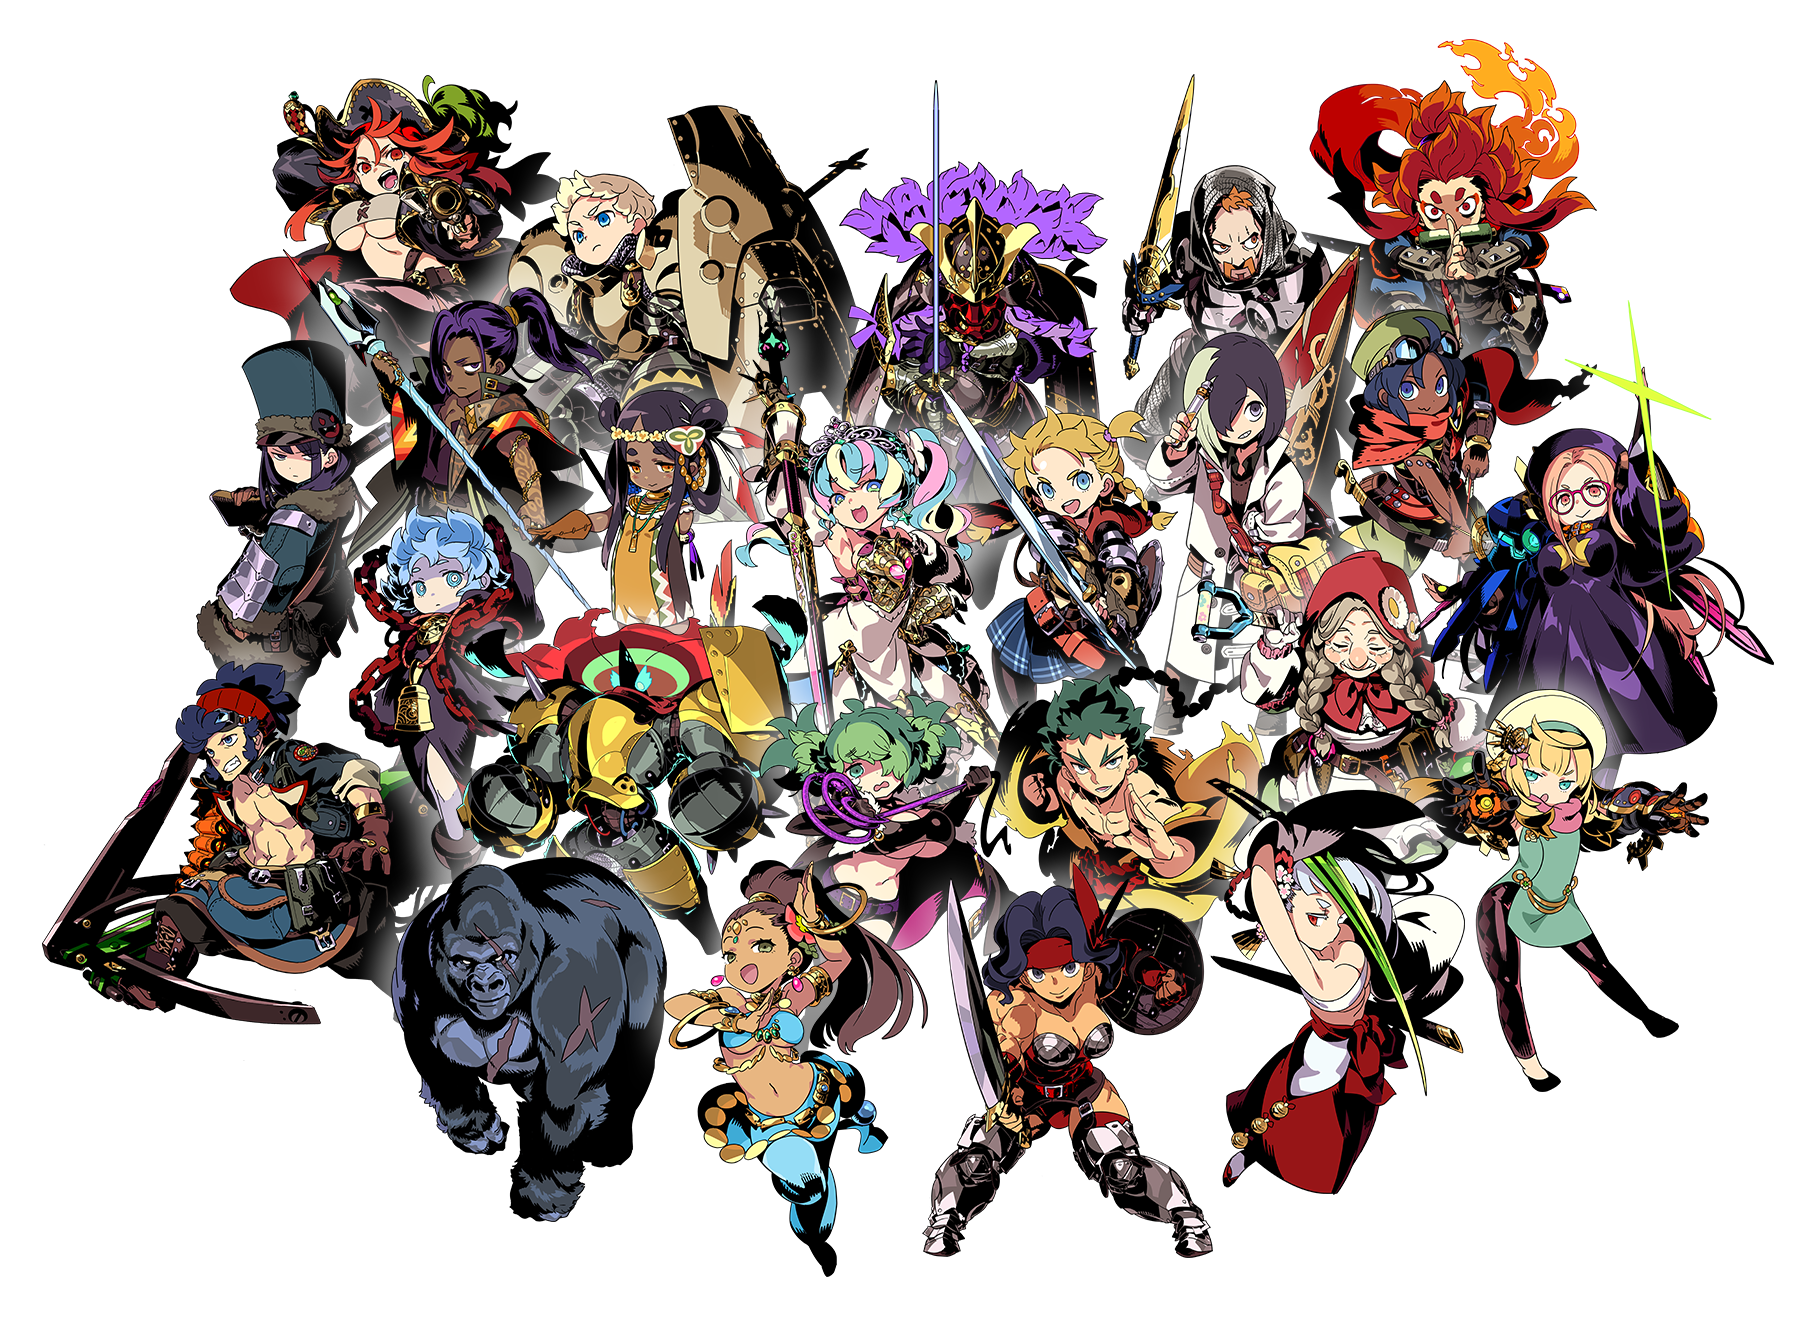 all the new class portraits from Etrian Odyssey Origins